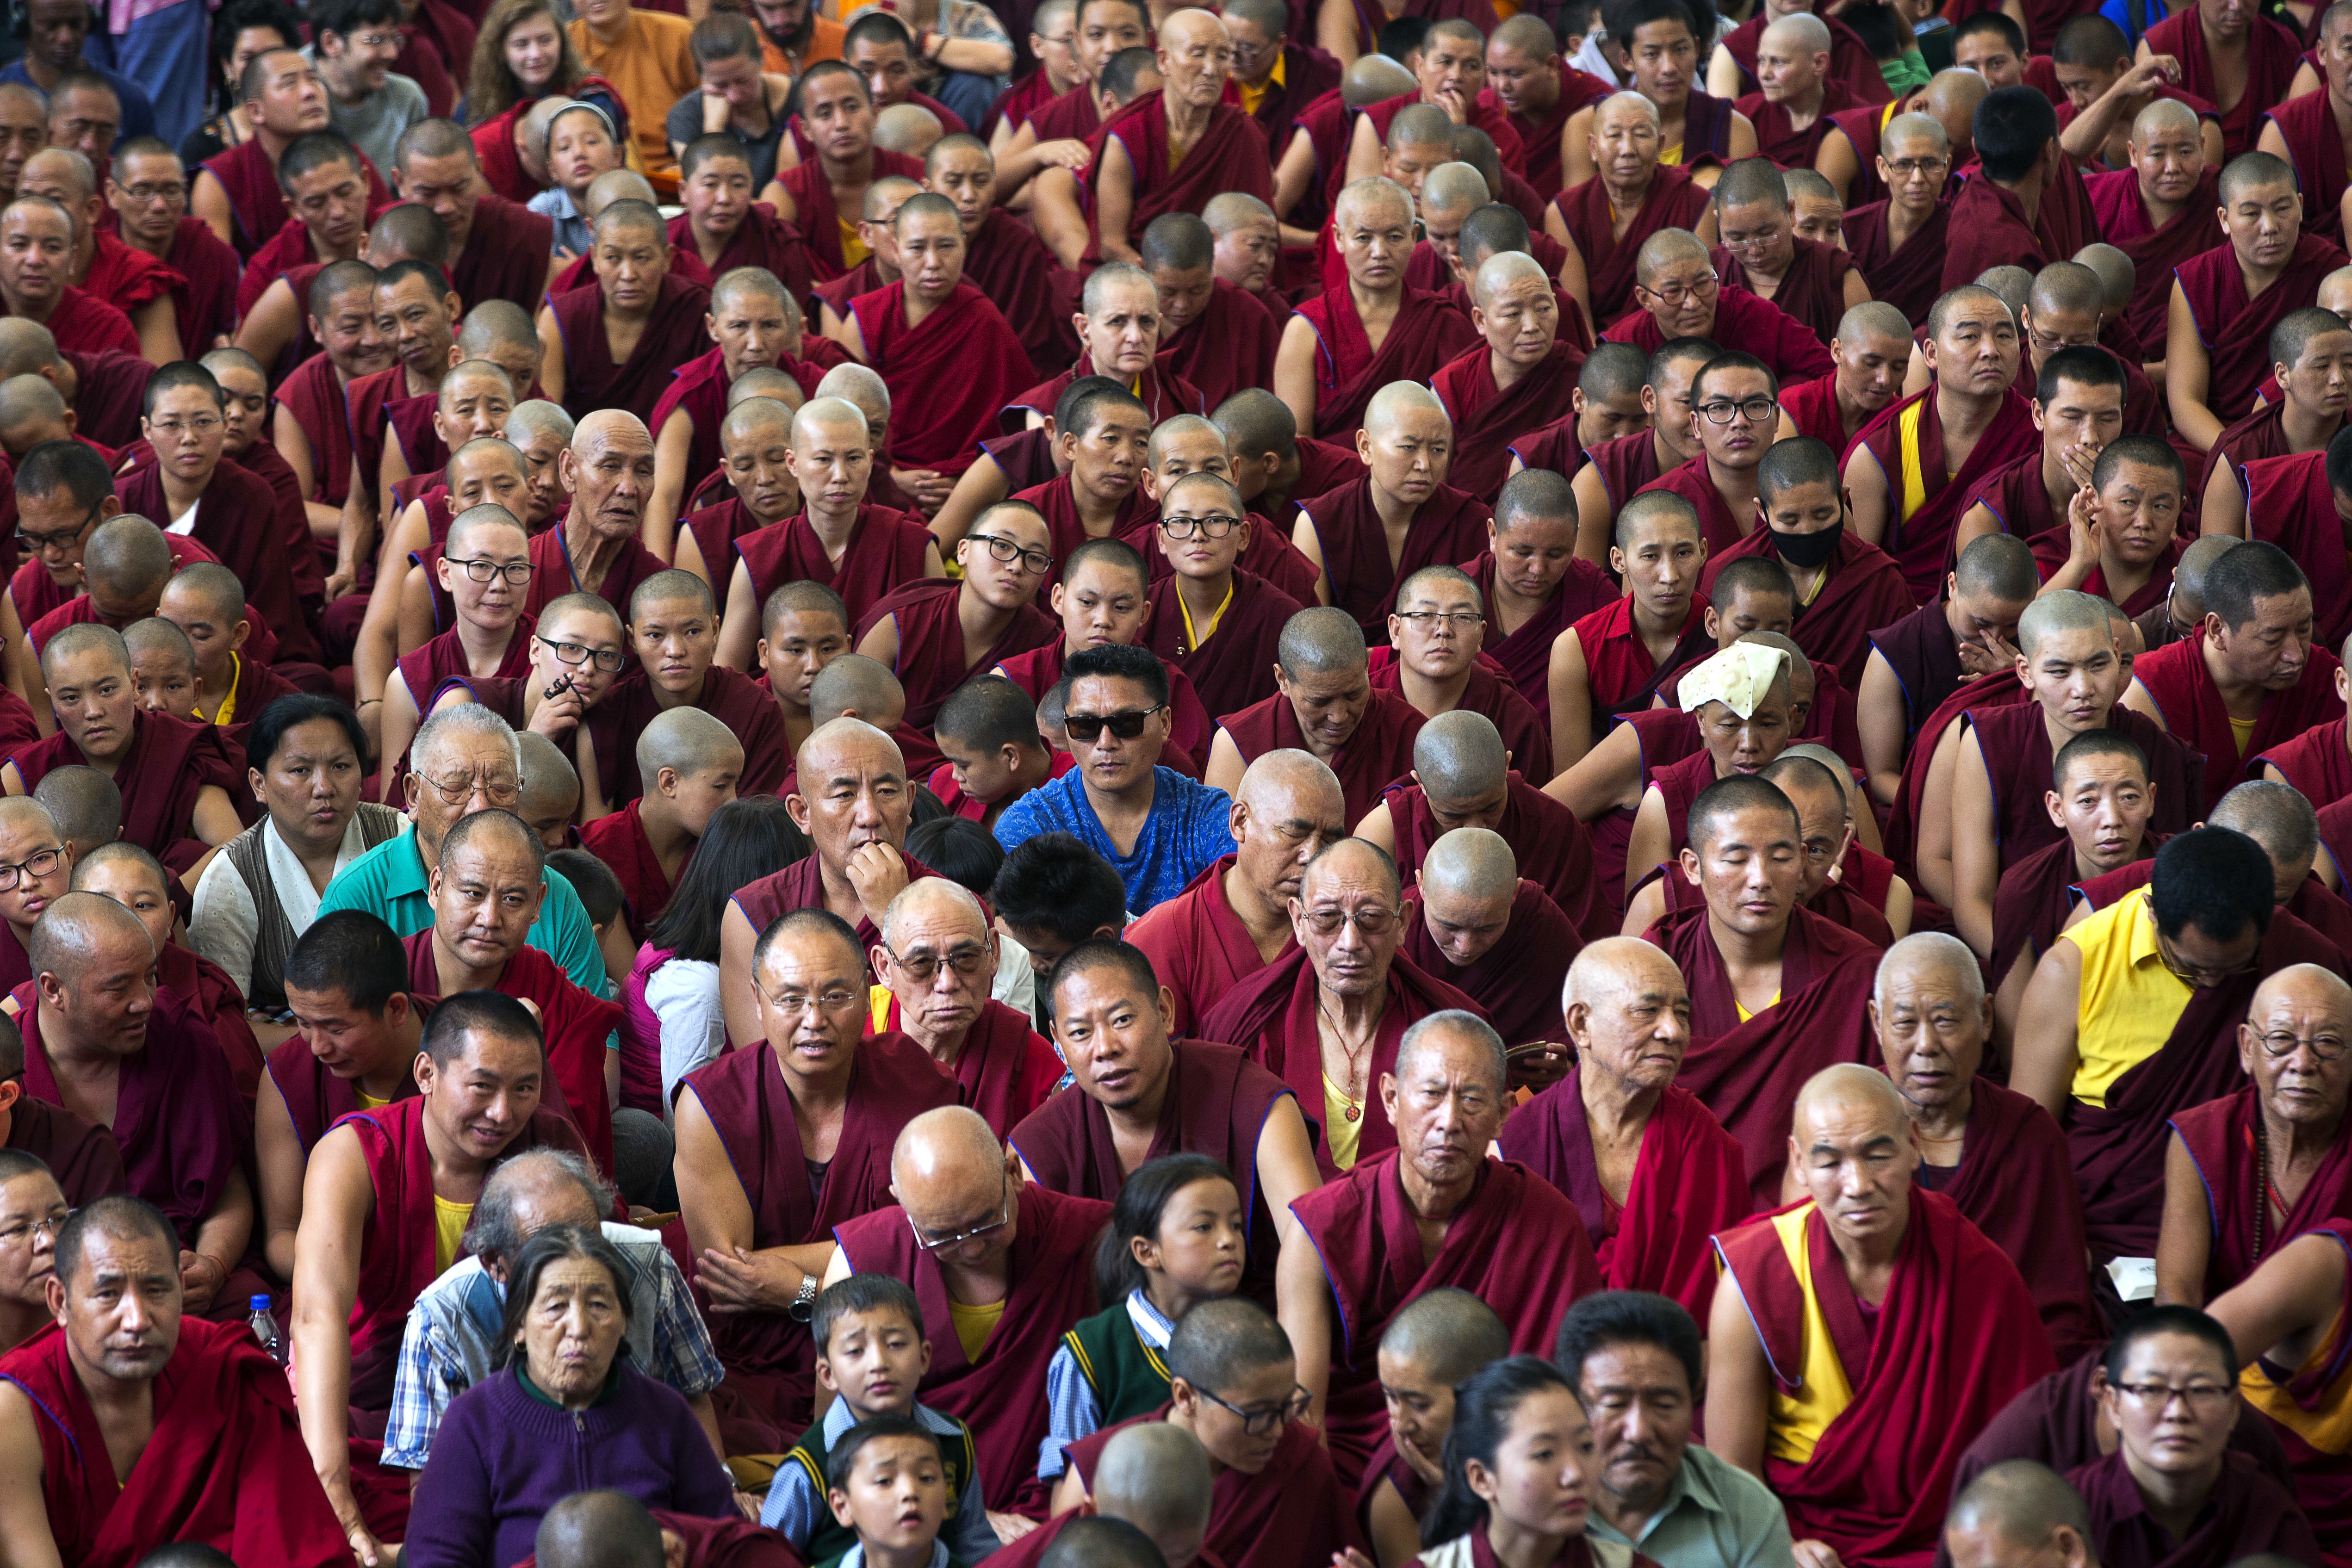 Tibetans listen to their spiritual leader the Dalai Lama as he gives a religious talk at the Tsuglagkhang temple in Dharmsala, India, Monday, June 5, 2017. Each year the Tibetan leader talks to young Tibetans on Buddhist philosophy and religion. The three-day talk will end Wednesday. (AP Photo/Ashwini Bhatia)